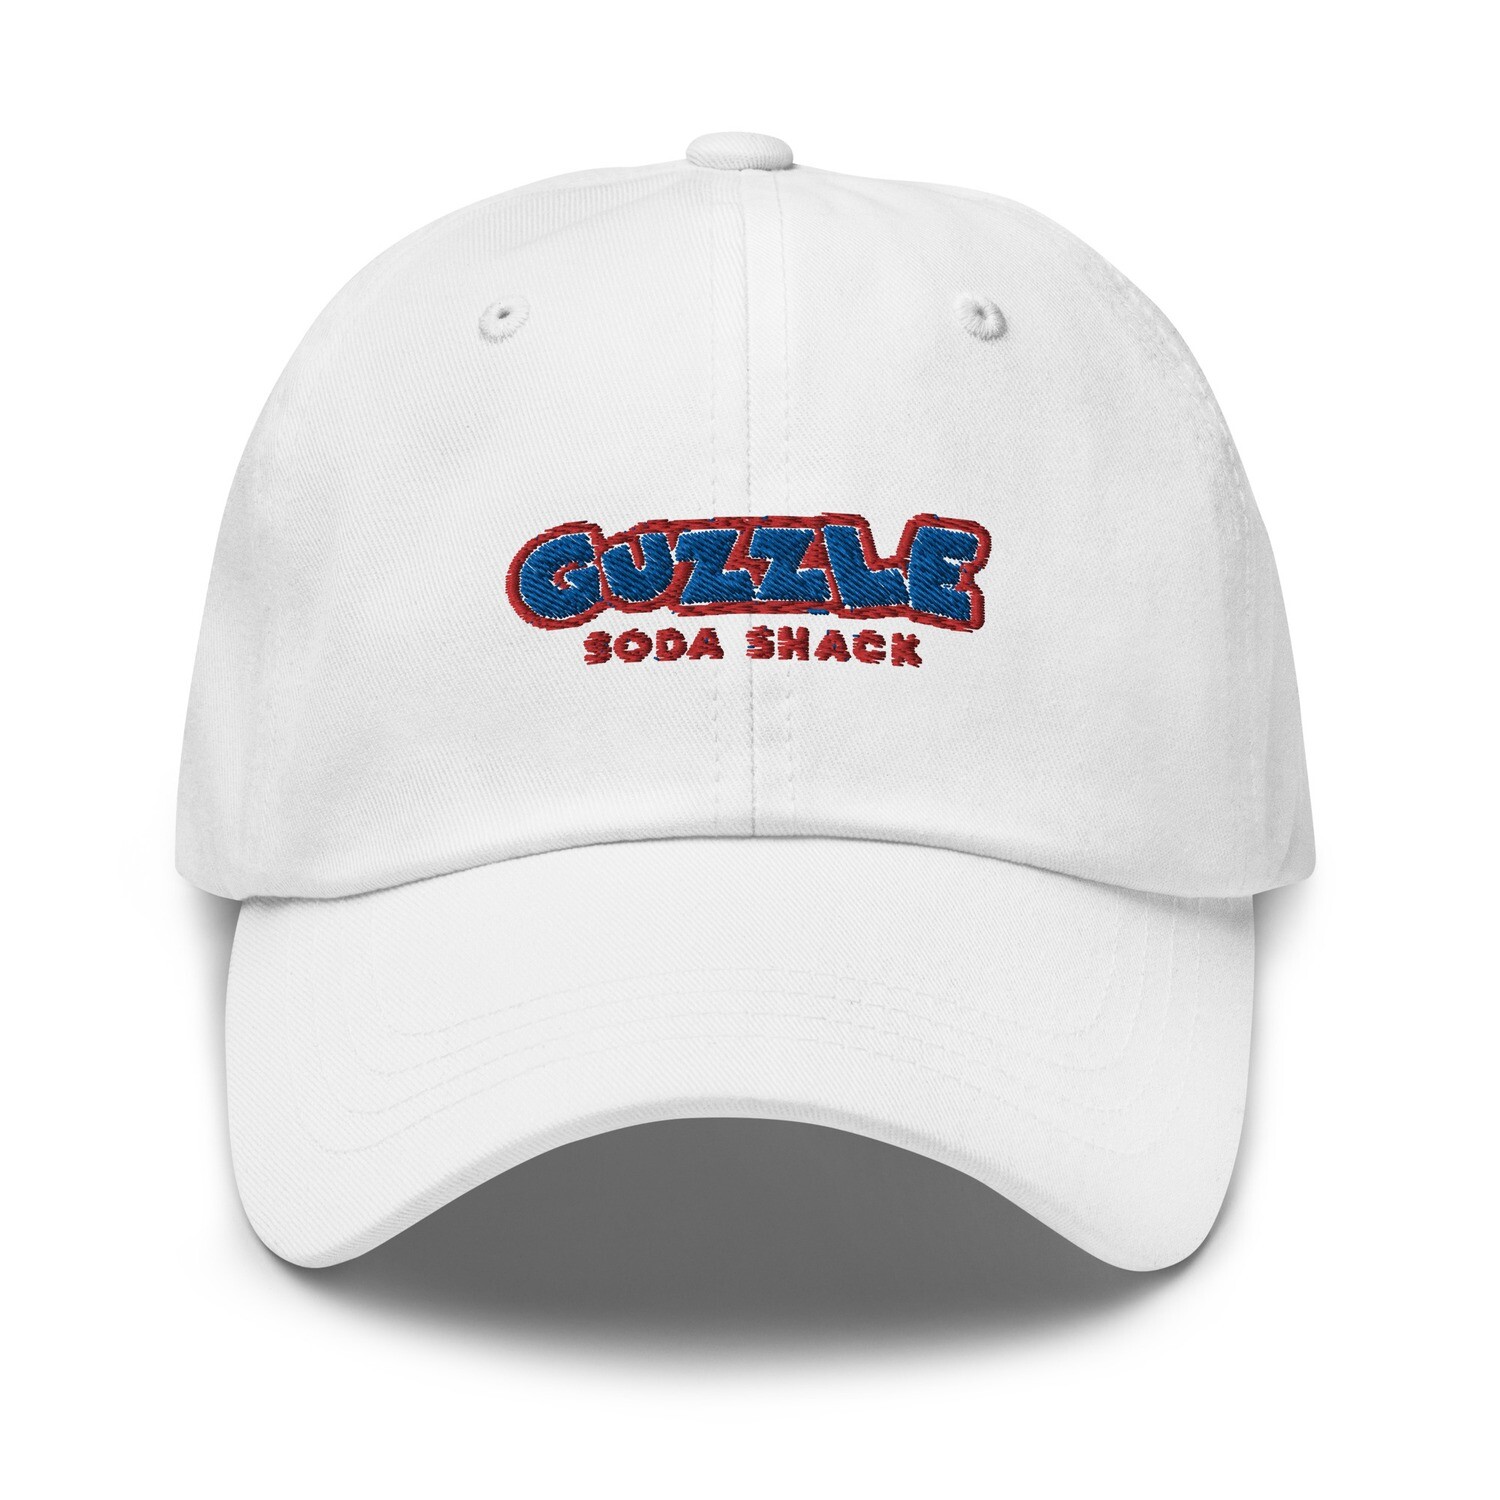 Dad hat - RED, WHITE, And BLUE